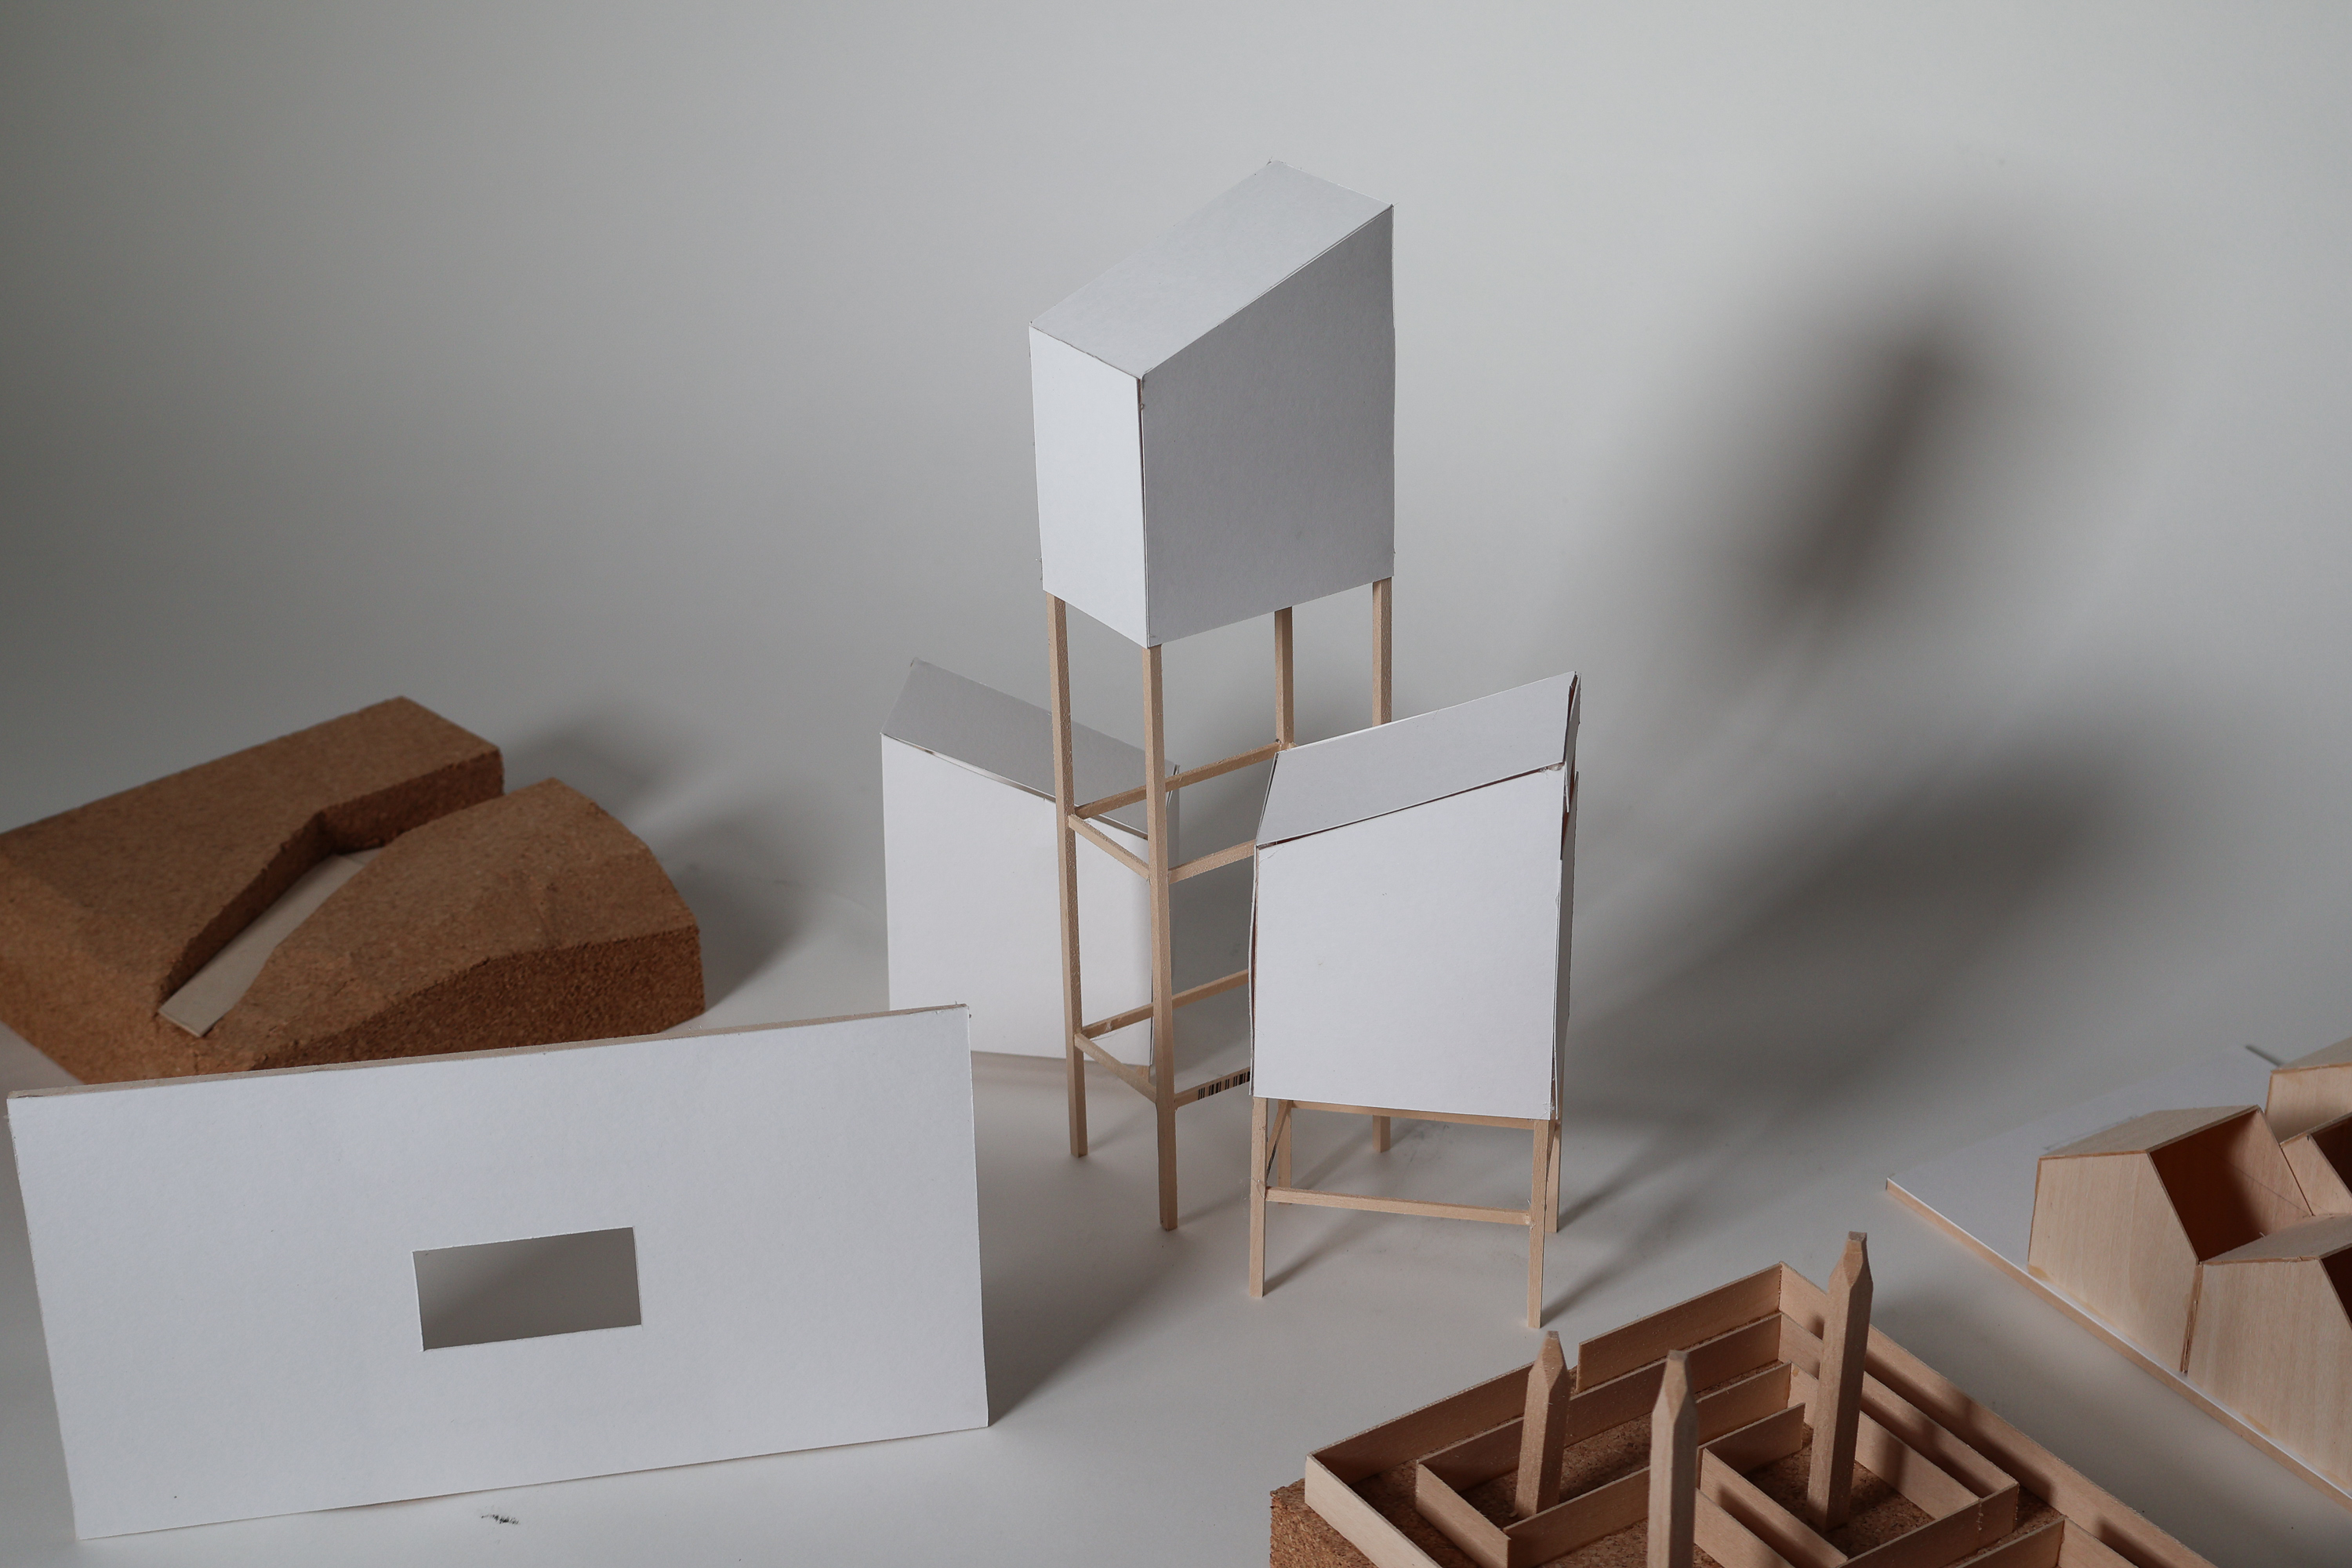 /Five%20study%20models%20each%20exploring%20a%20different%20architectural%20motif%20present%20in%20studied%20remote%20structures.